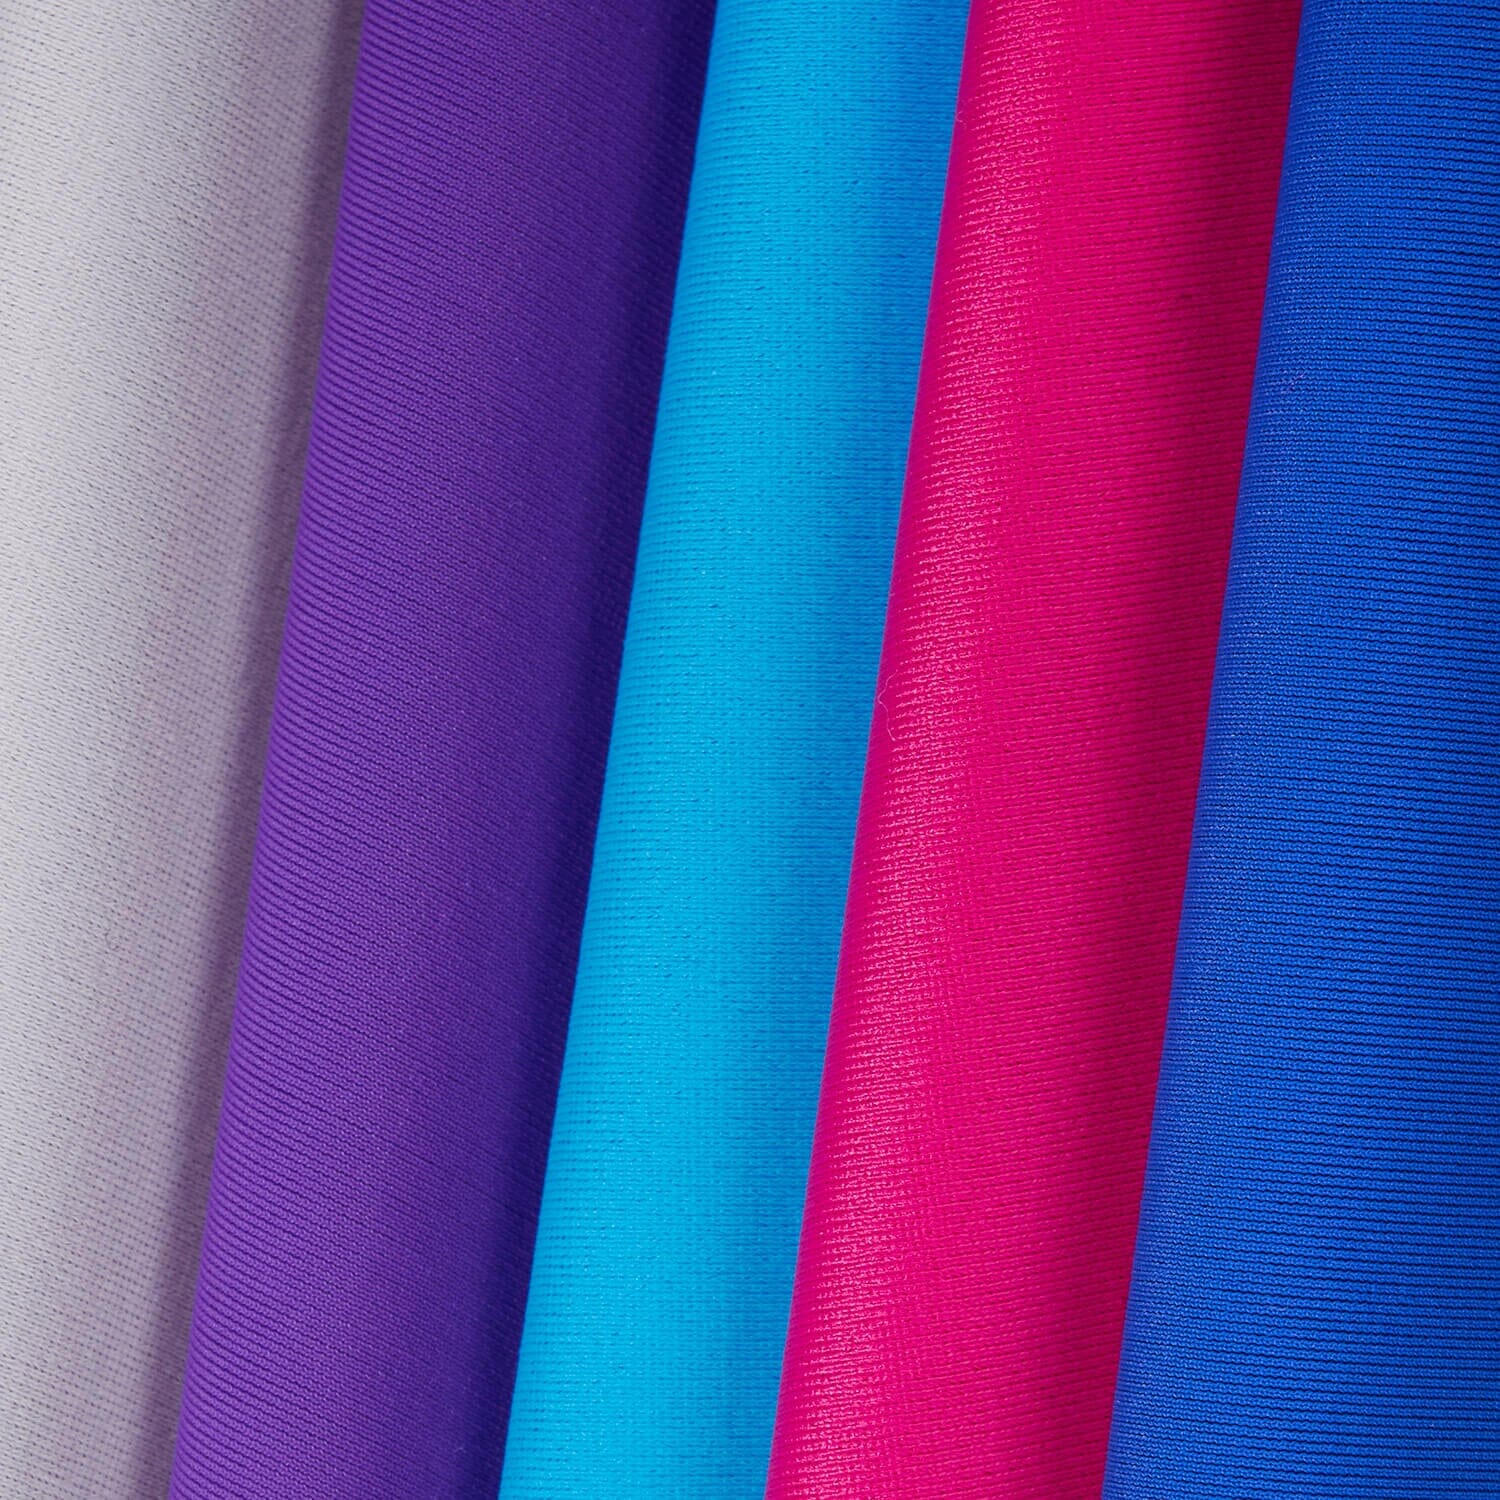 UPF 50 Polyester Spandex Fabric Moisture Wicking Material 200gsm